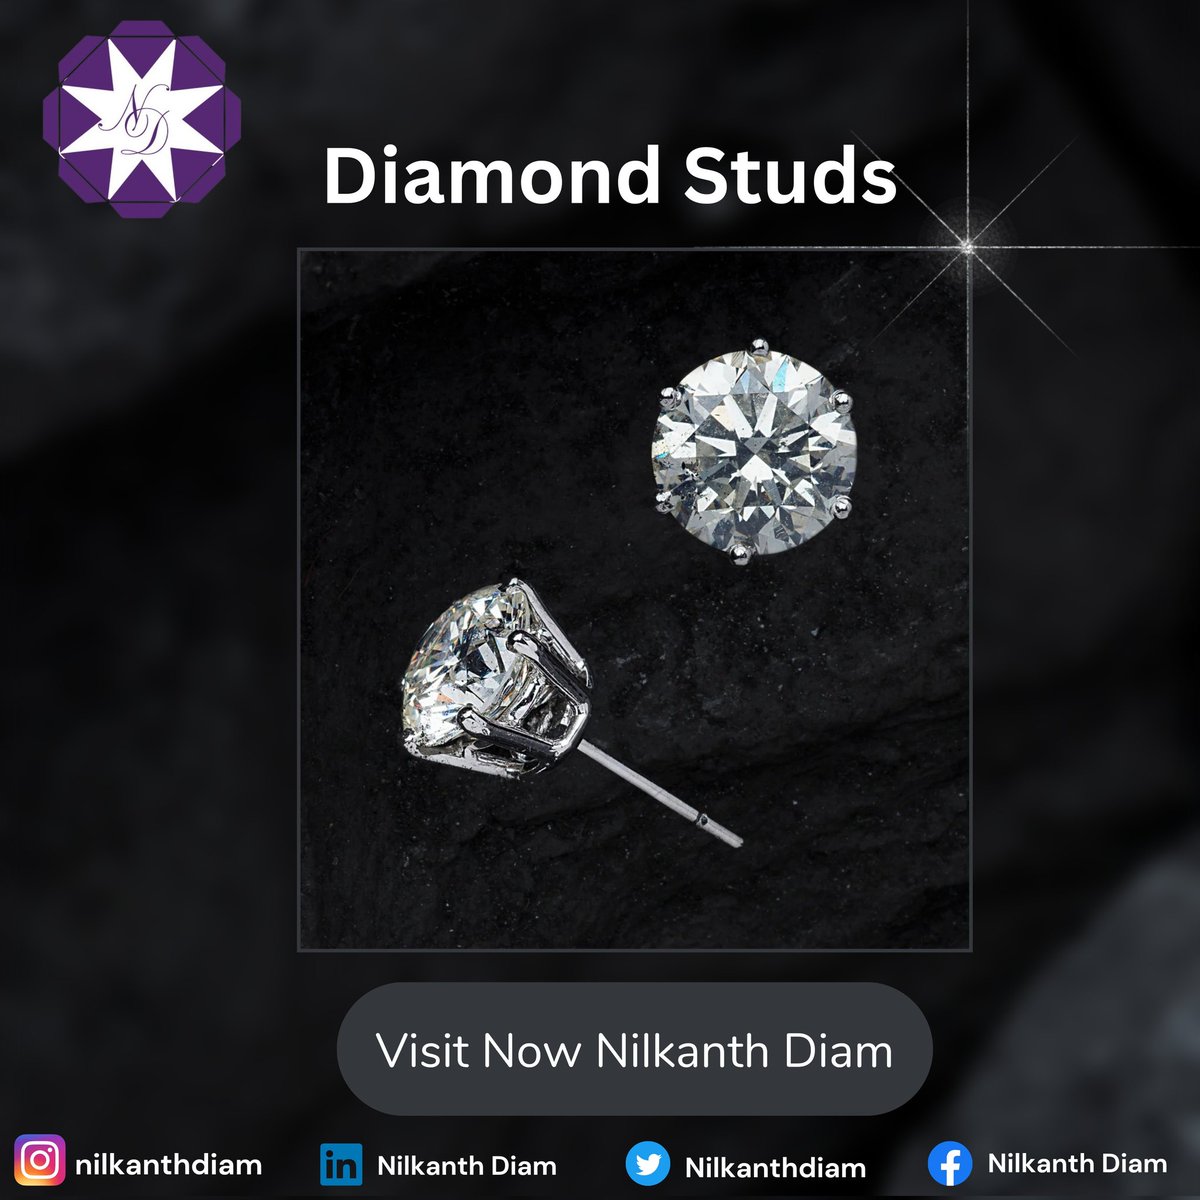 Jewellery has the power to be this one little thing that can make you feel unique.
.
.
#diamonds #diamond #diamondstuds #diamondjewellery #labgrowndiamond #labgrown #instagram #facebook #linkedin #twitter #moneychallenge